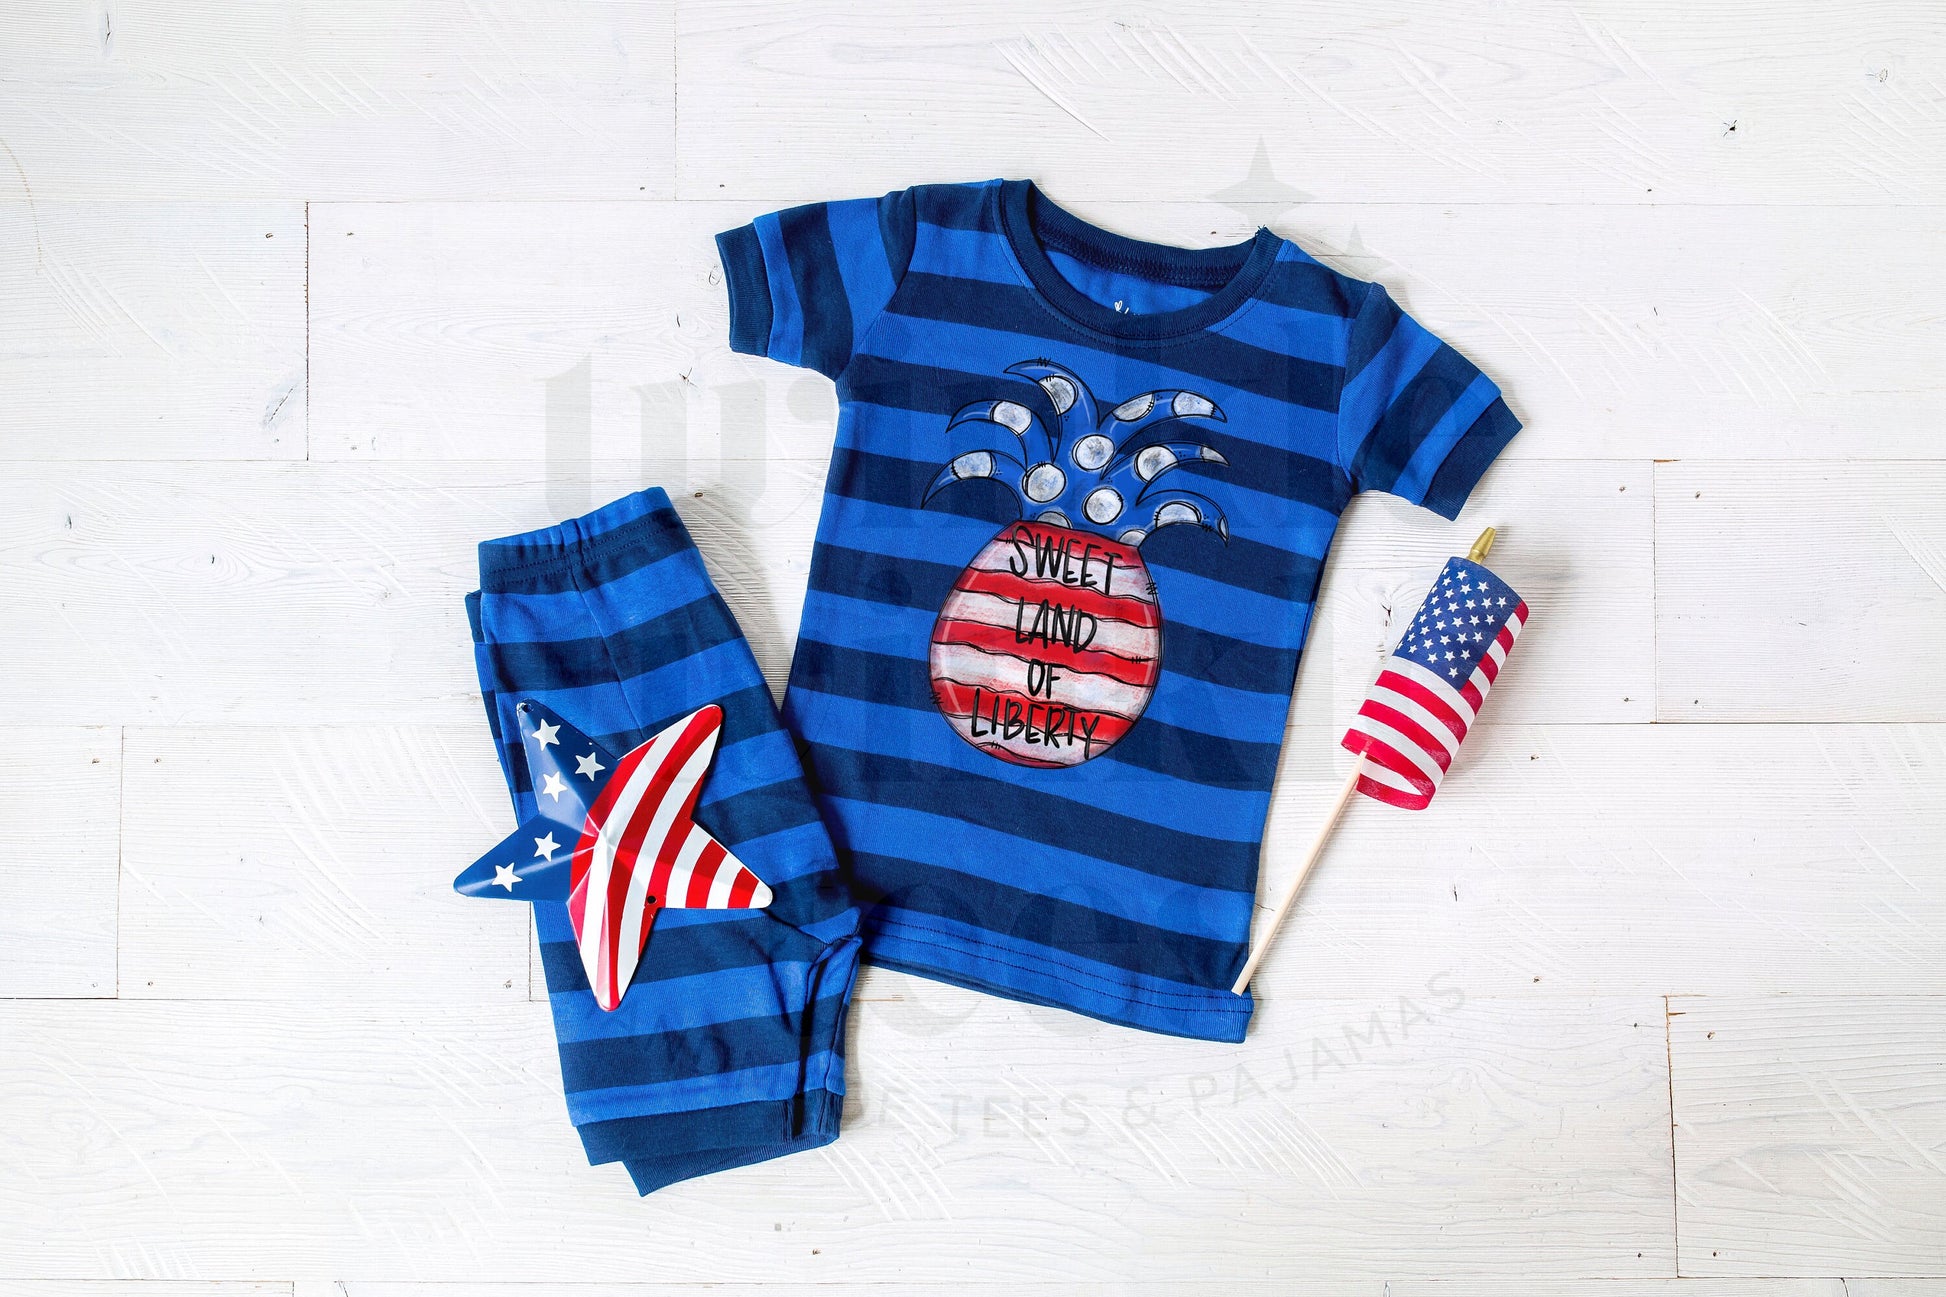 Sweet Land of Liberty Blue Striped Shorts Set for Kids - Kids 4th of July Set - 4th of July Toddler Shirt and Shorts